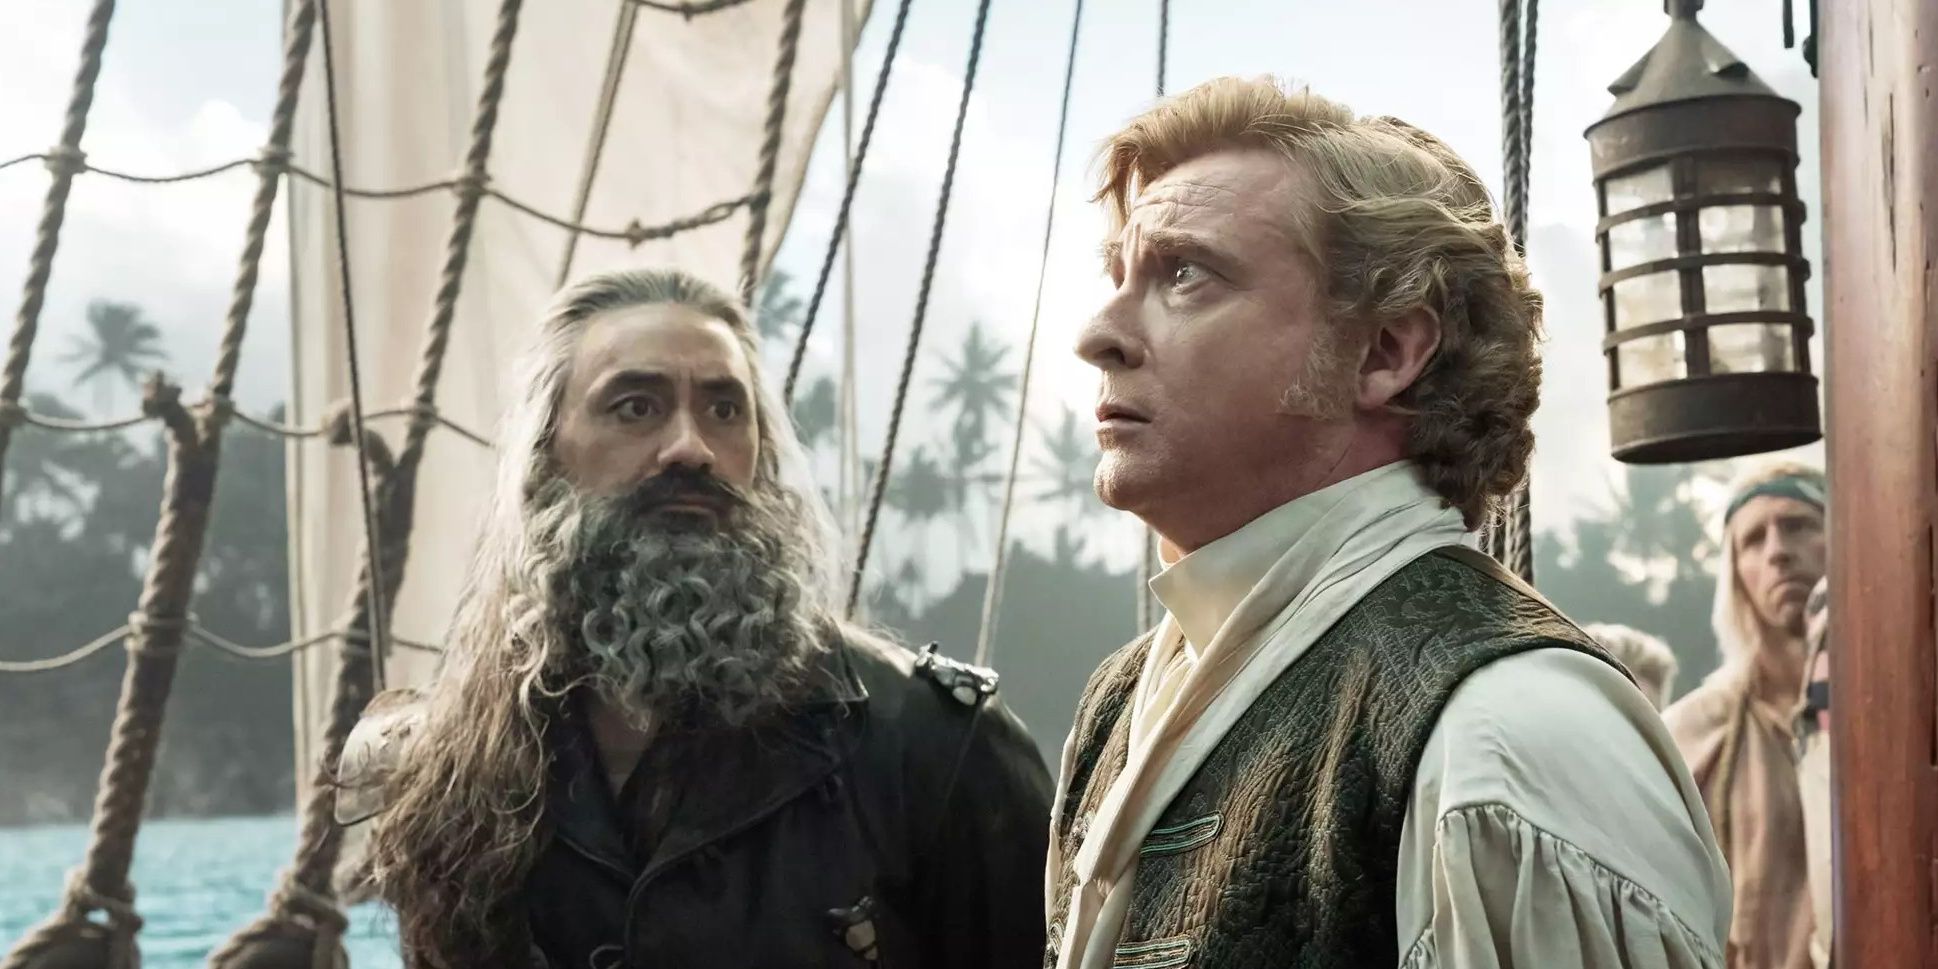 Taika Waititi looks adoringly at Rhys Darby on a ship in a scene from Our Flag Means Death